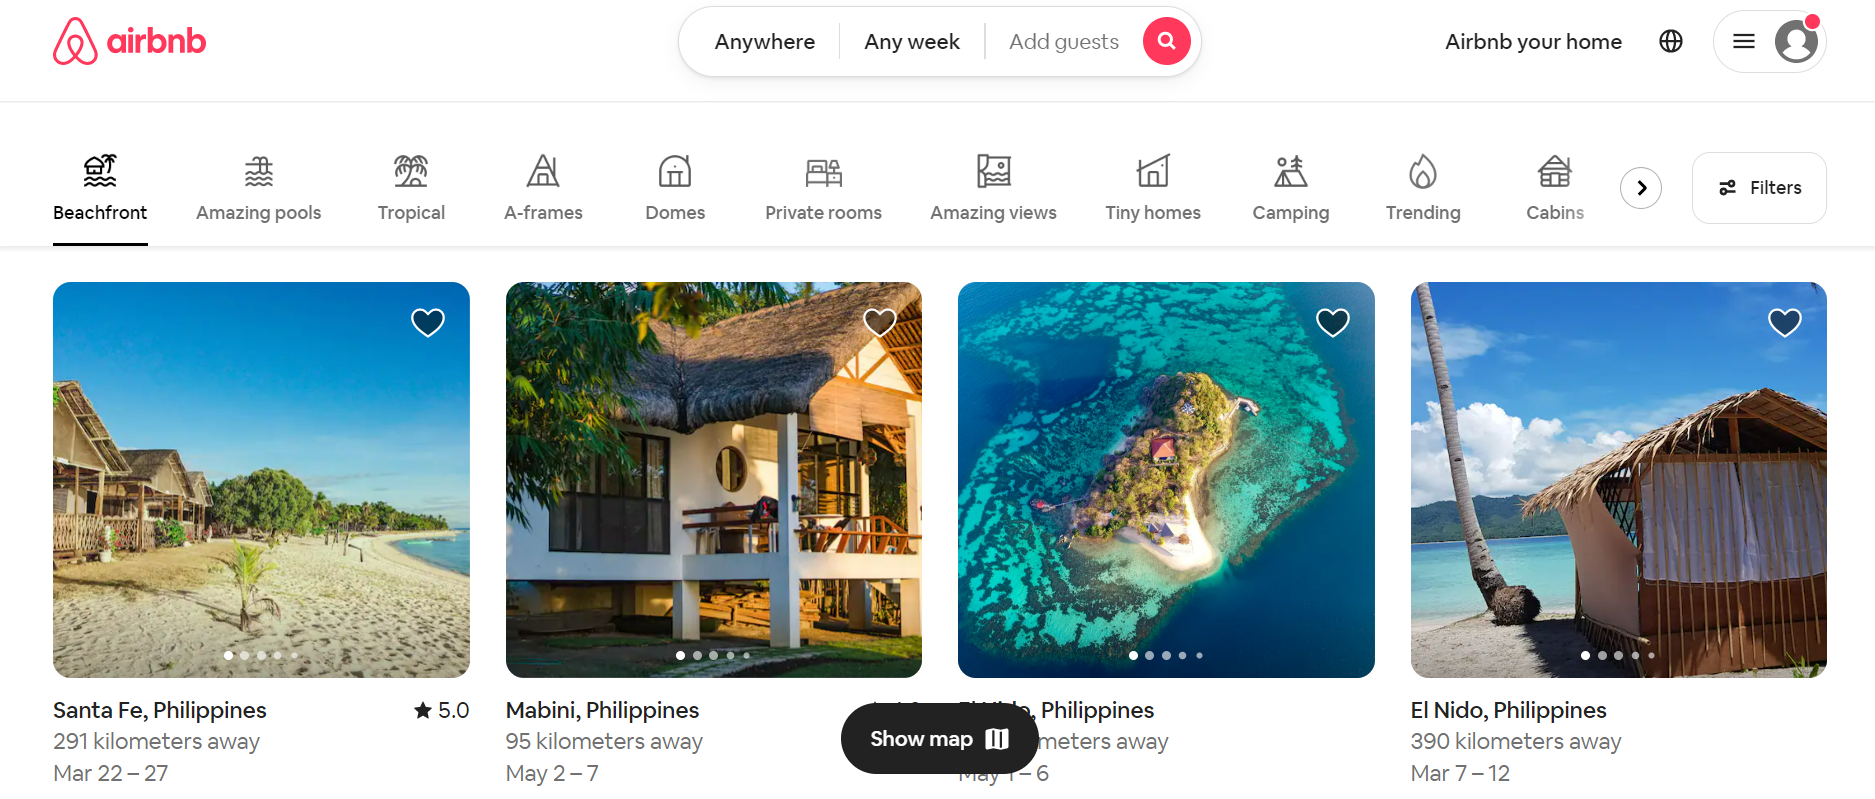 travel websites in the philippines - airbnb